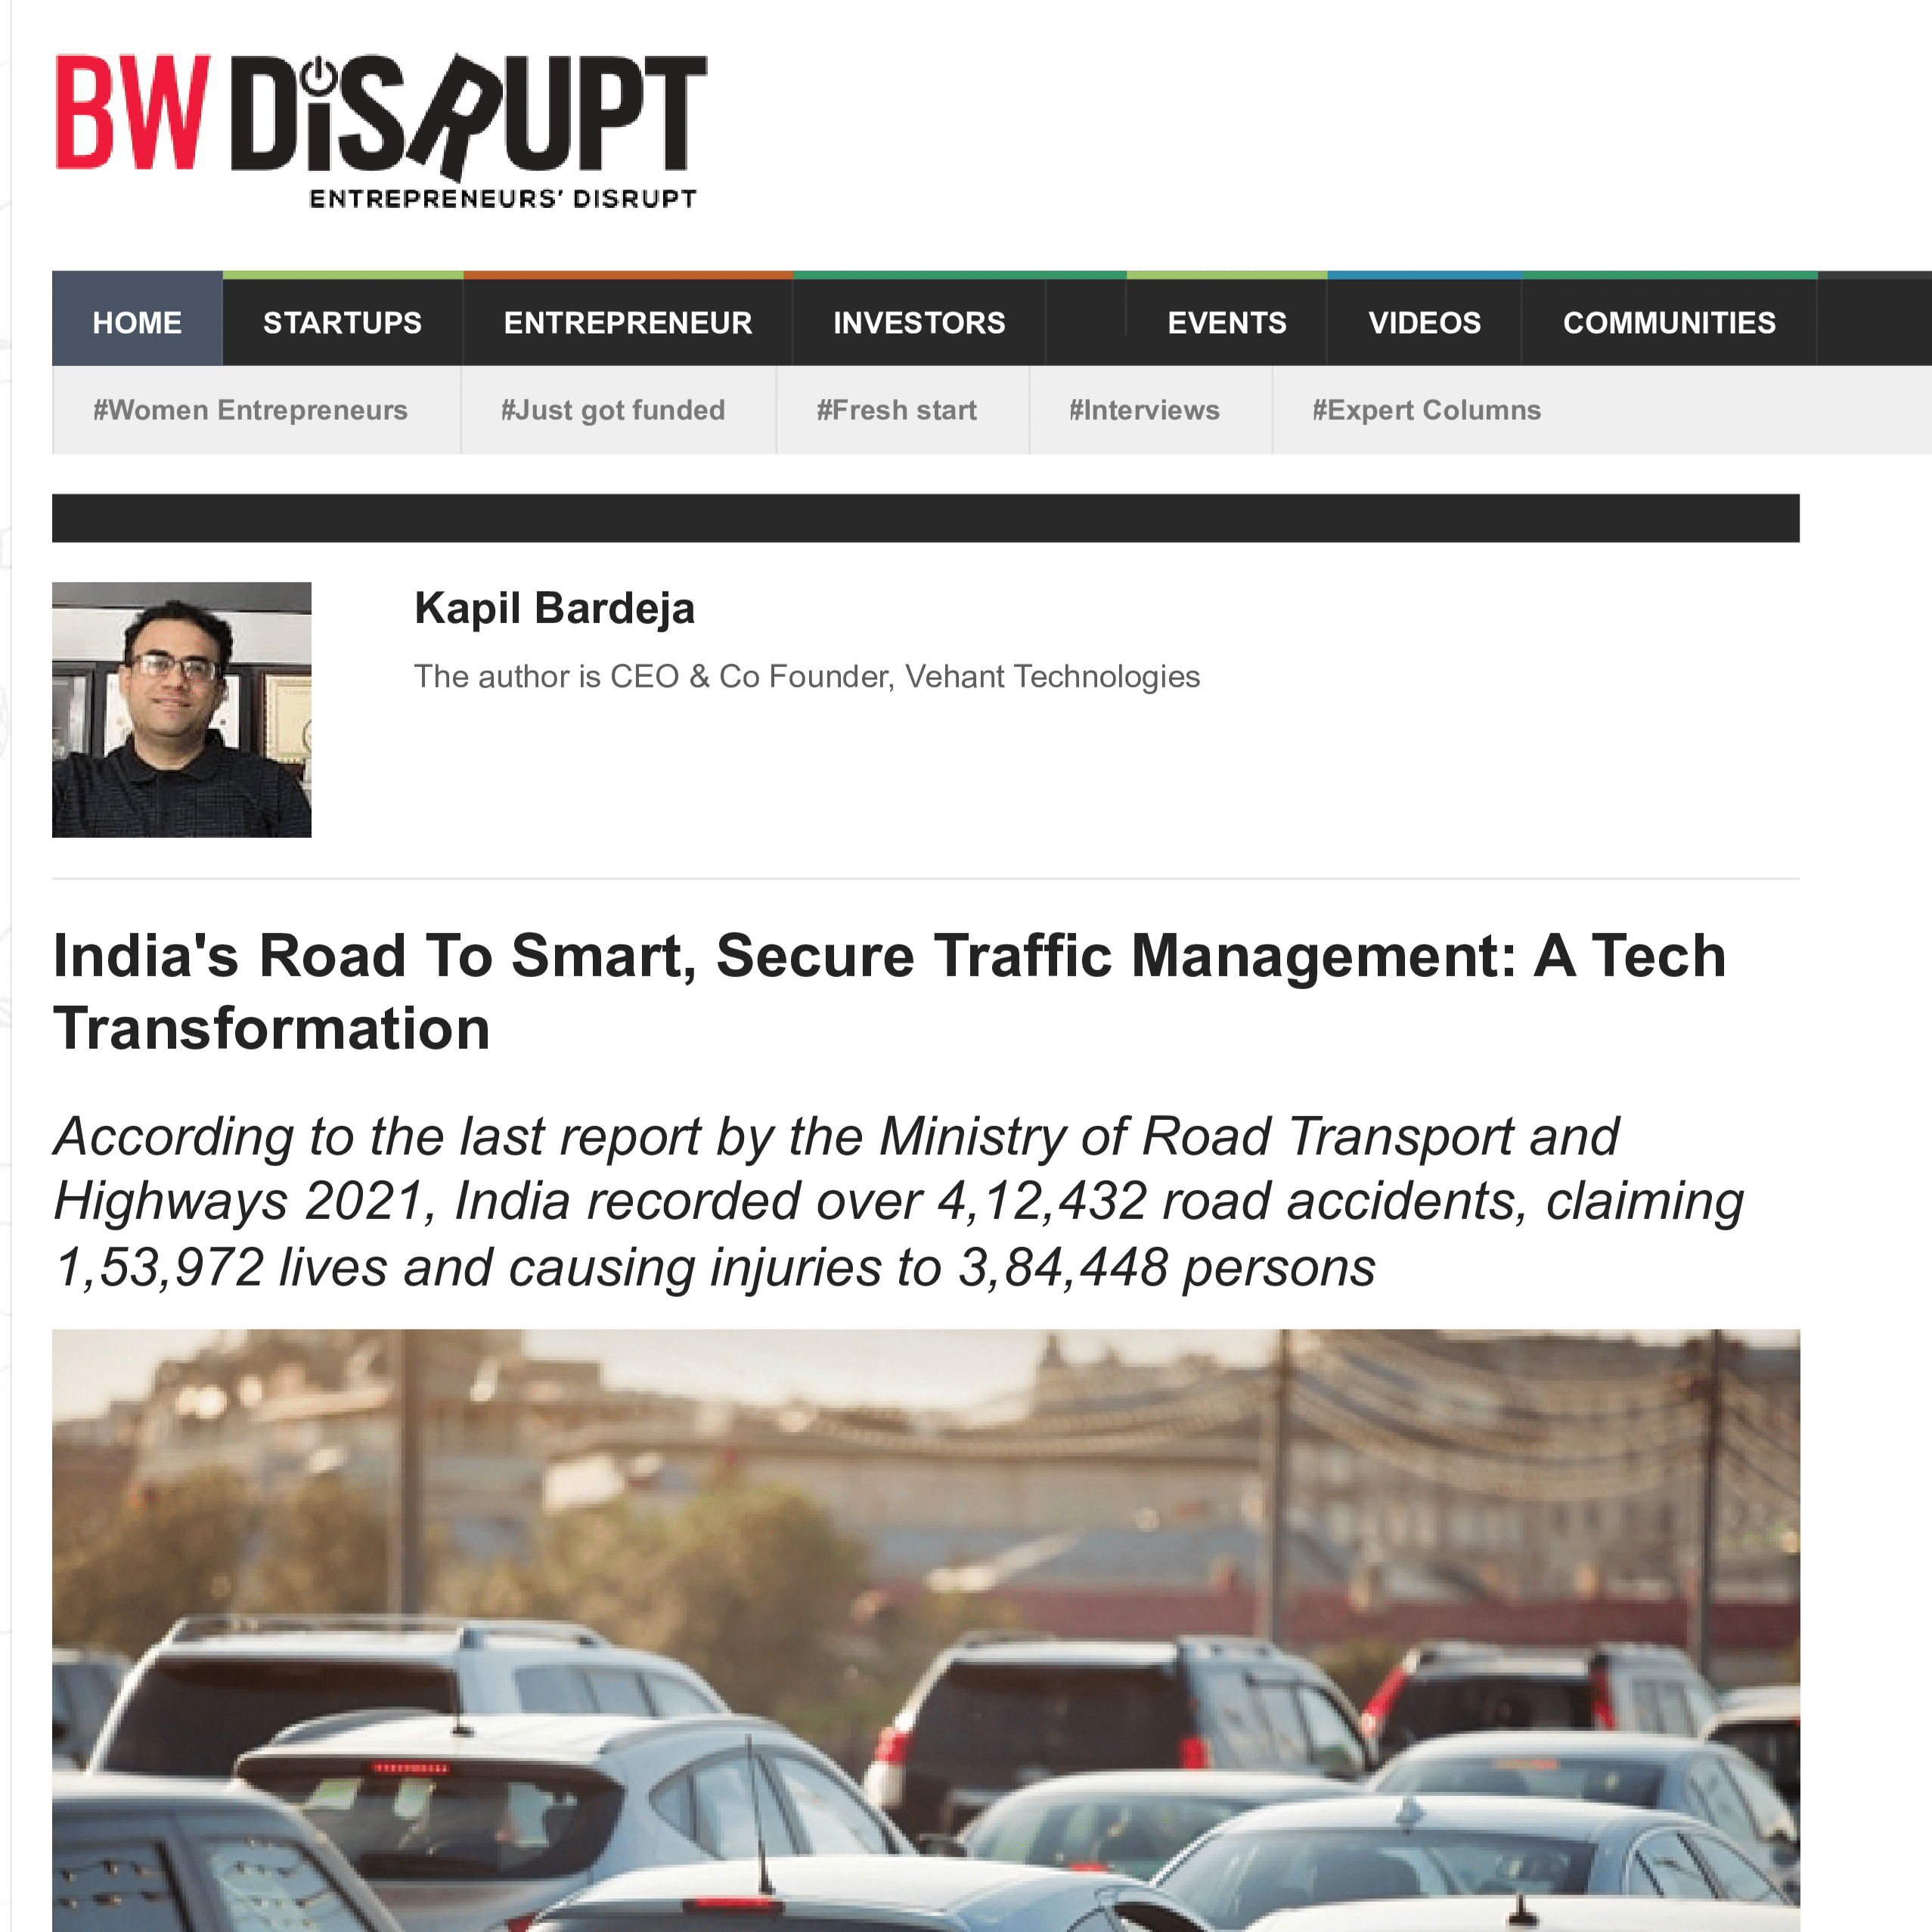 India's Road To Smart, Secure Traffic Management: A Tech Transformation